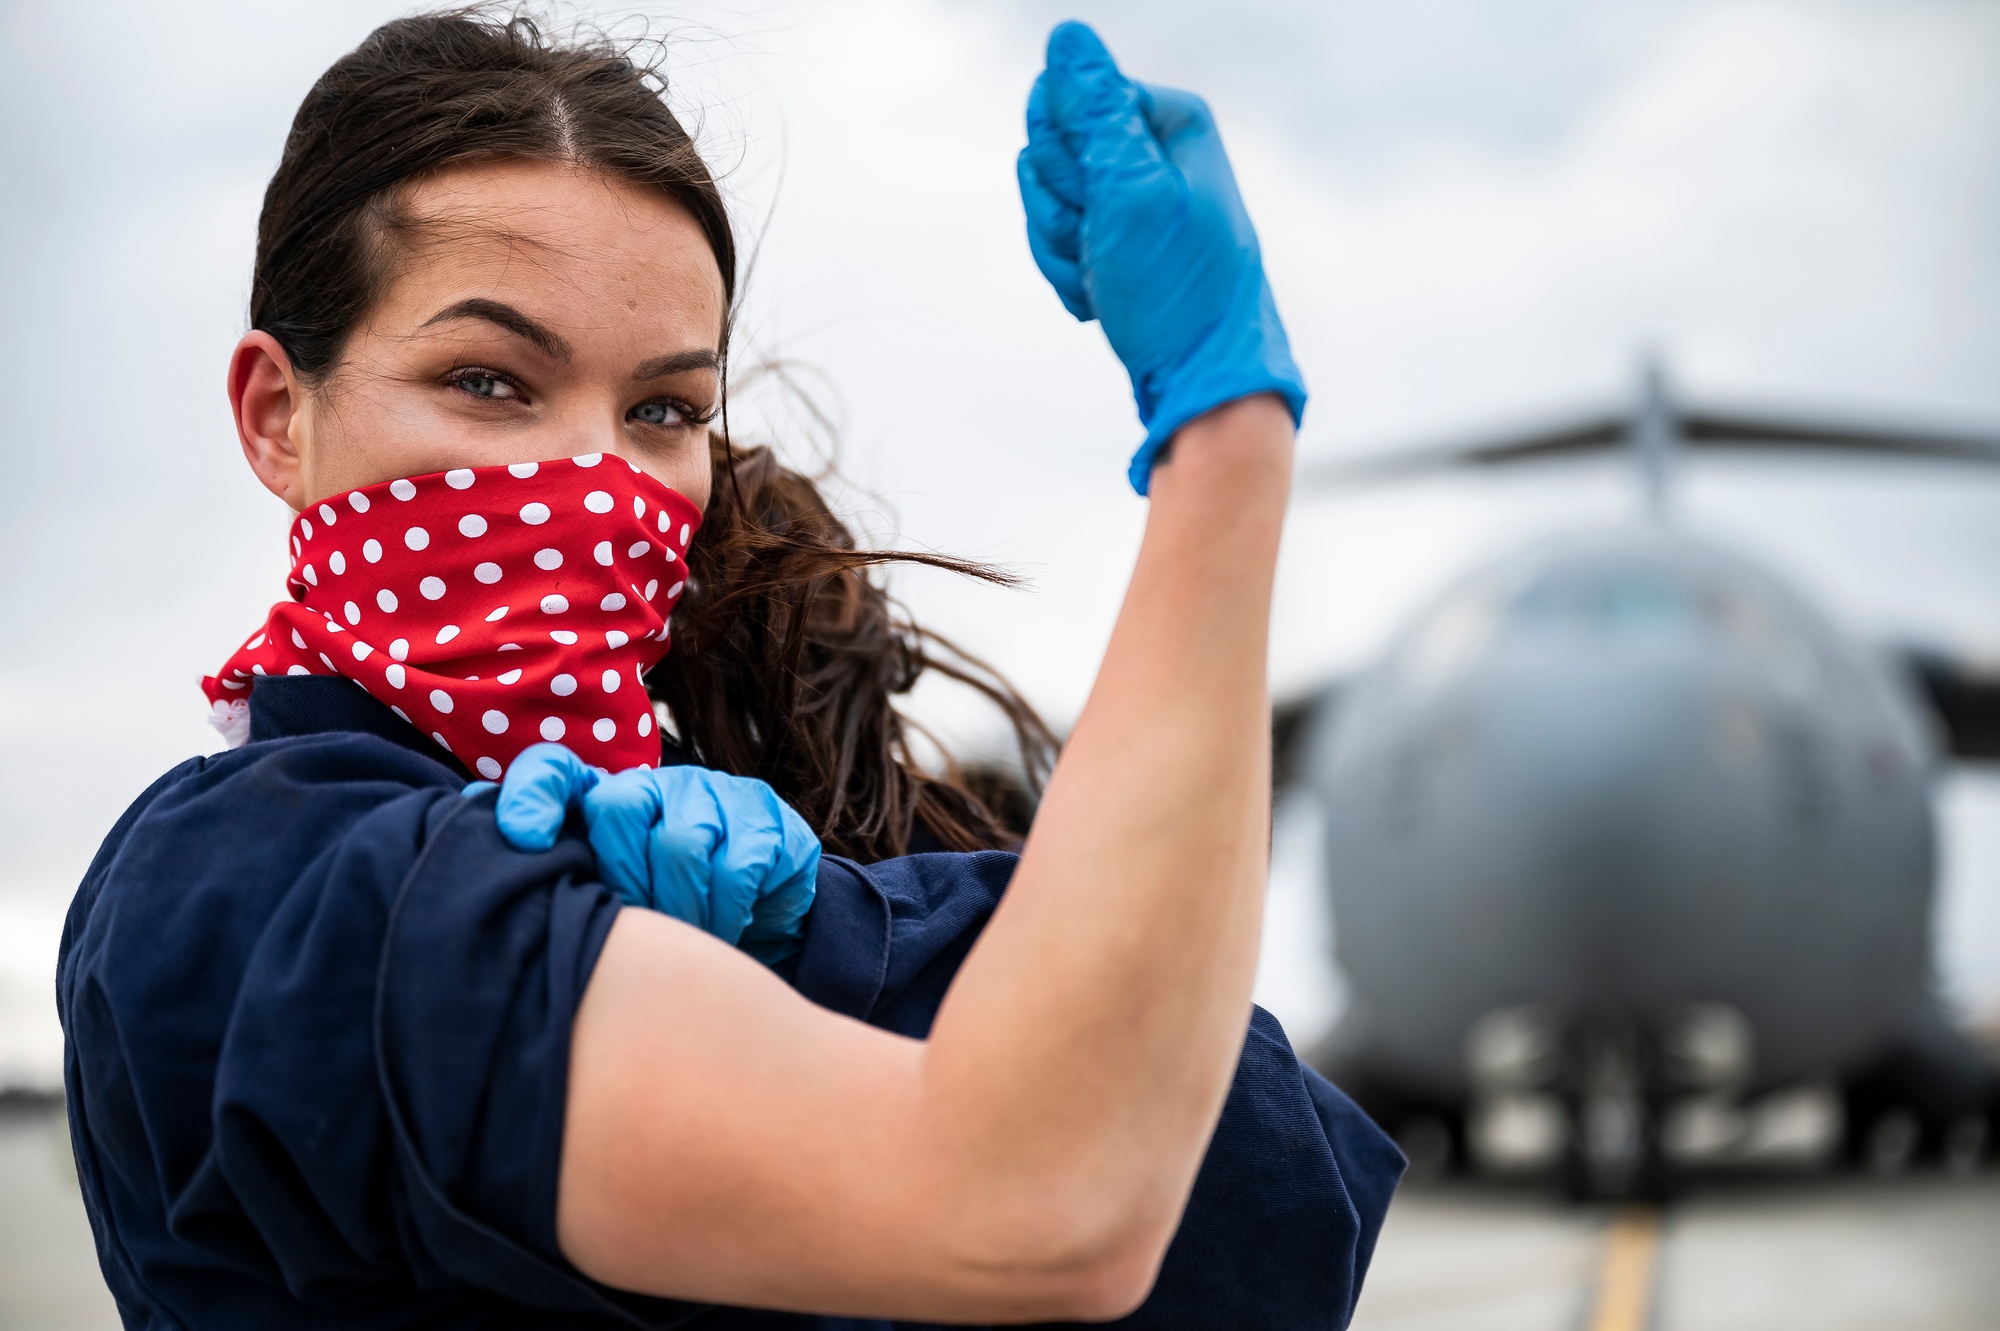 DVIDS - Images - Modern day Rosie the Riveter [Image 8 of 8]